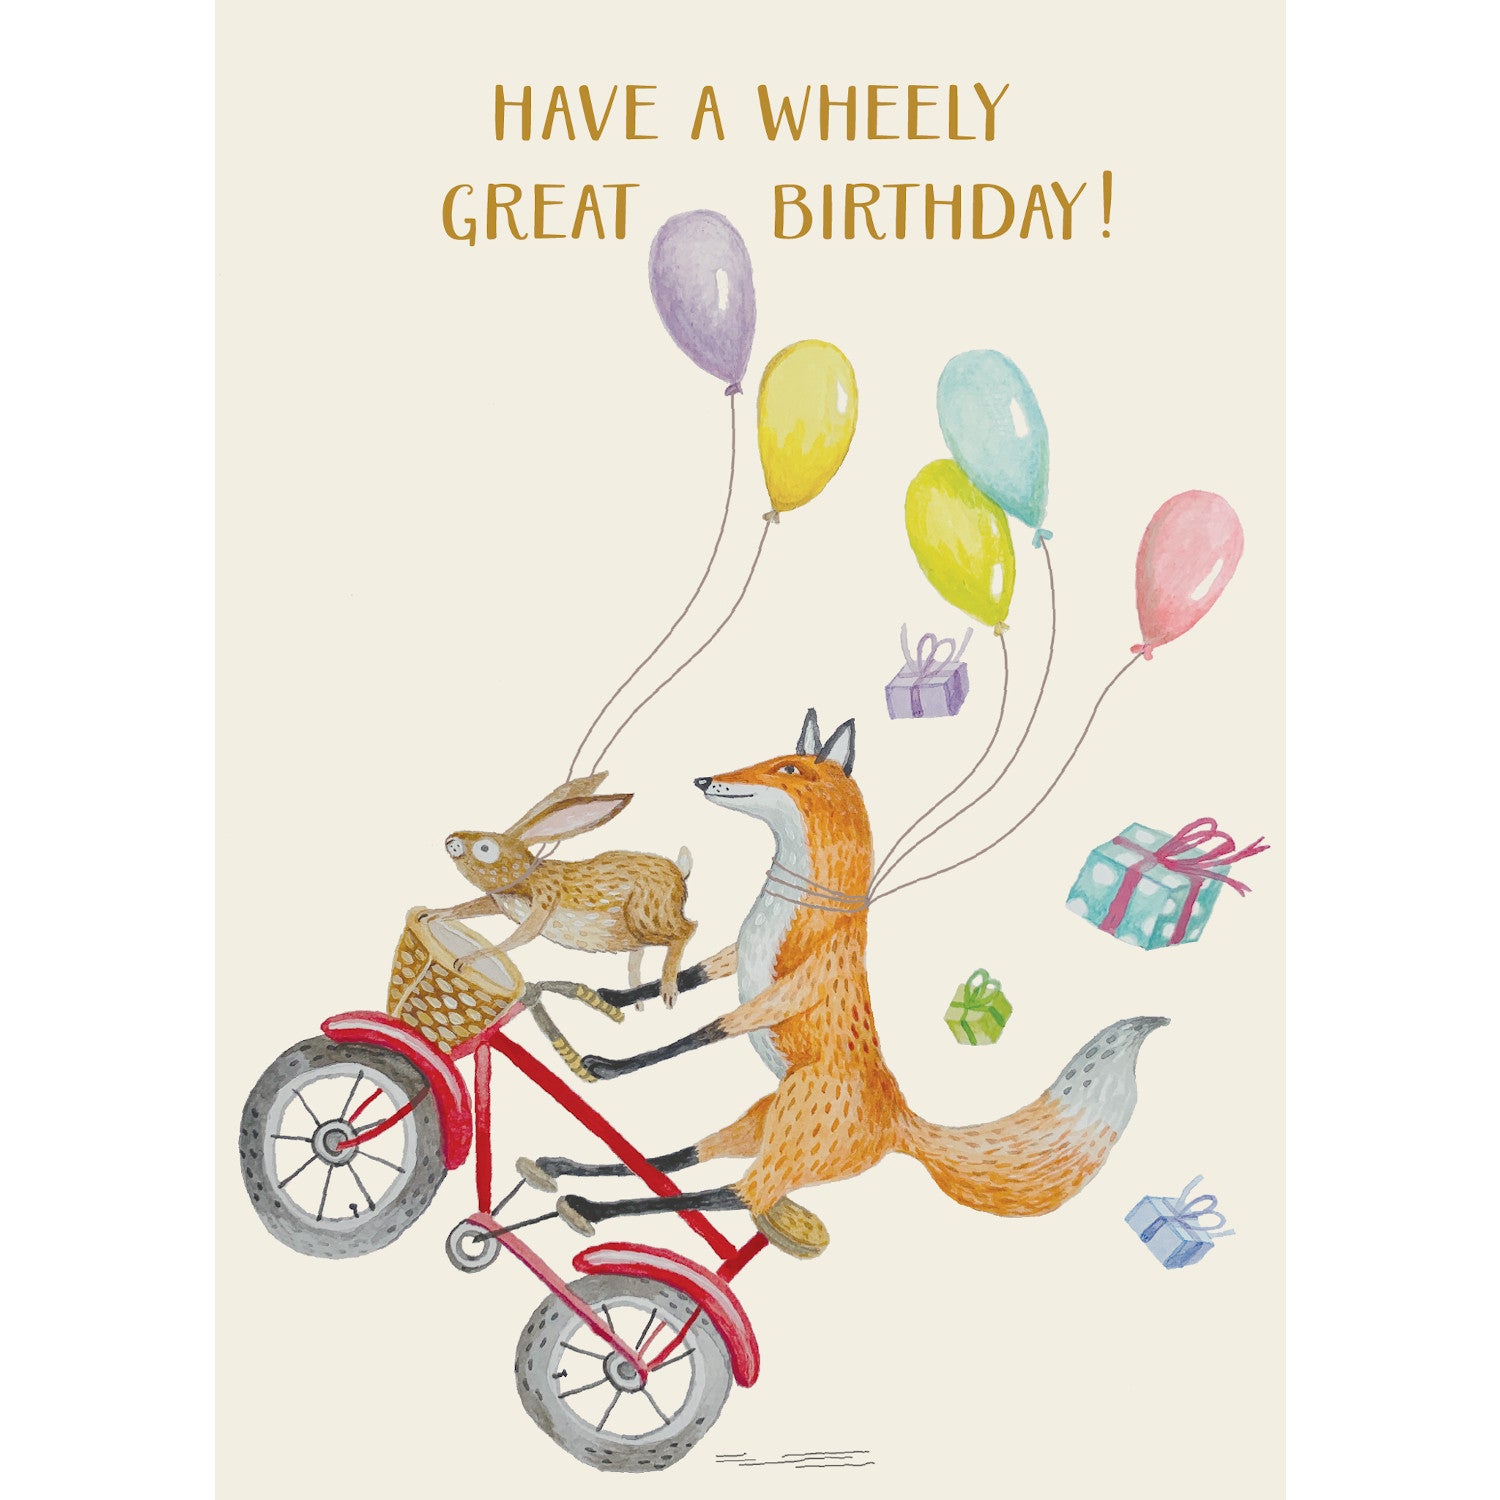 A whimsical illustration of a fox popping a wheely on a red bicycle with a rabbit hanging on to the basket, trailing with colorful balloons and wrapped gifts flying behind them, and the message &quot;HAVE A WHEELY GREAT BIRTHDAY!&quot; printed in gold across the top of the card.